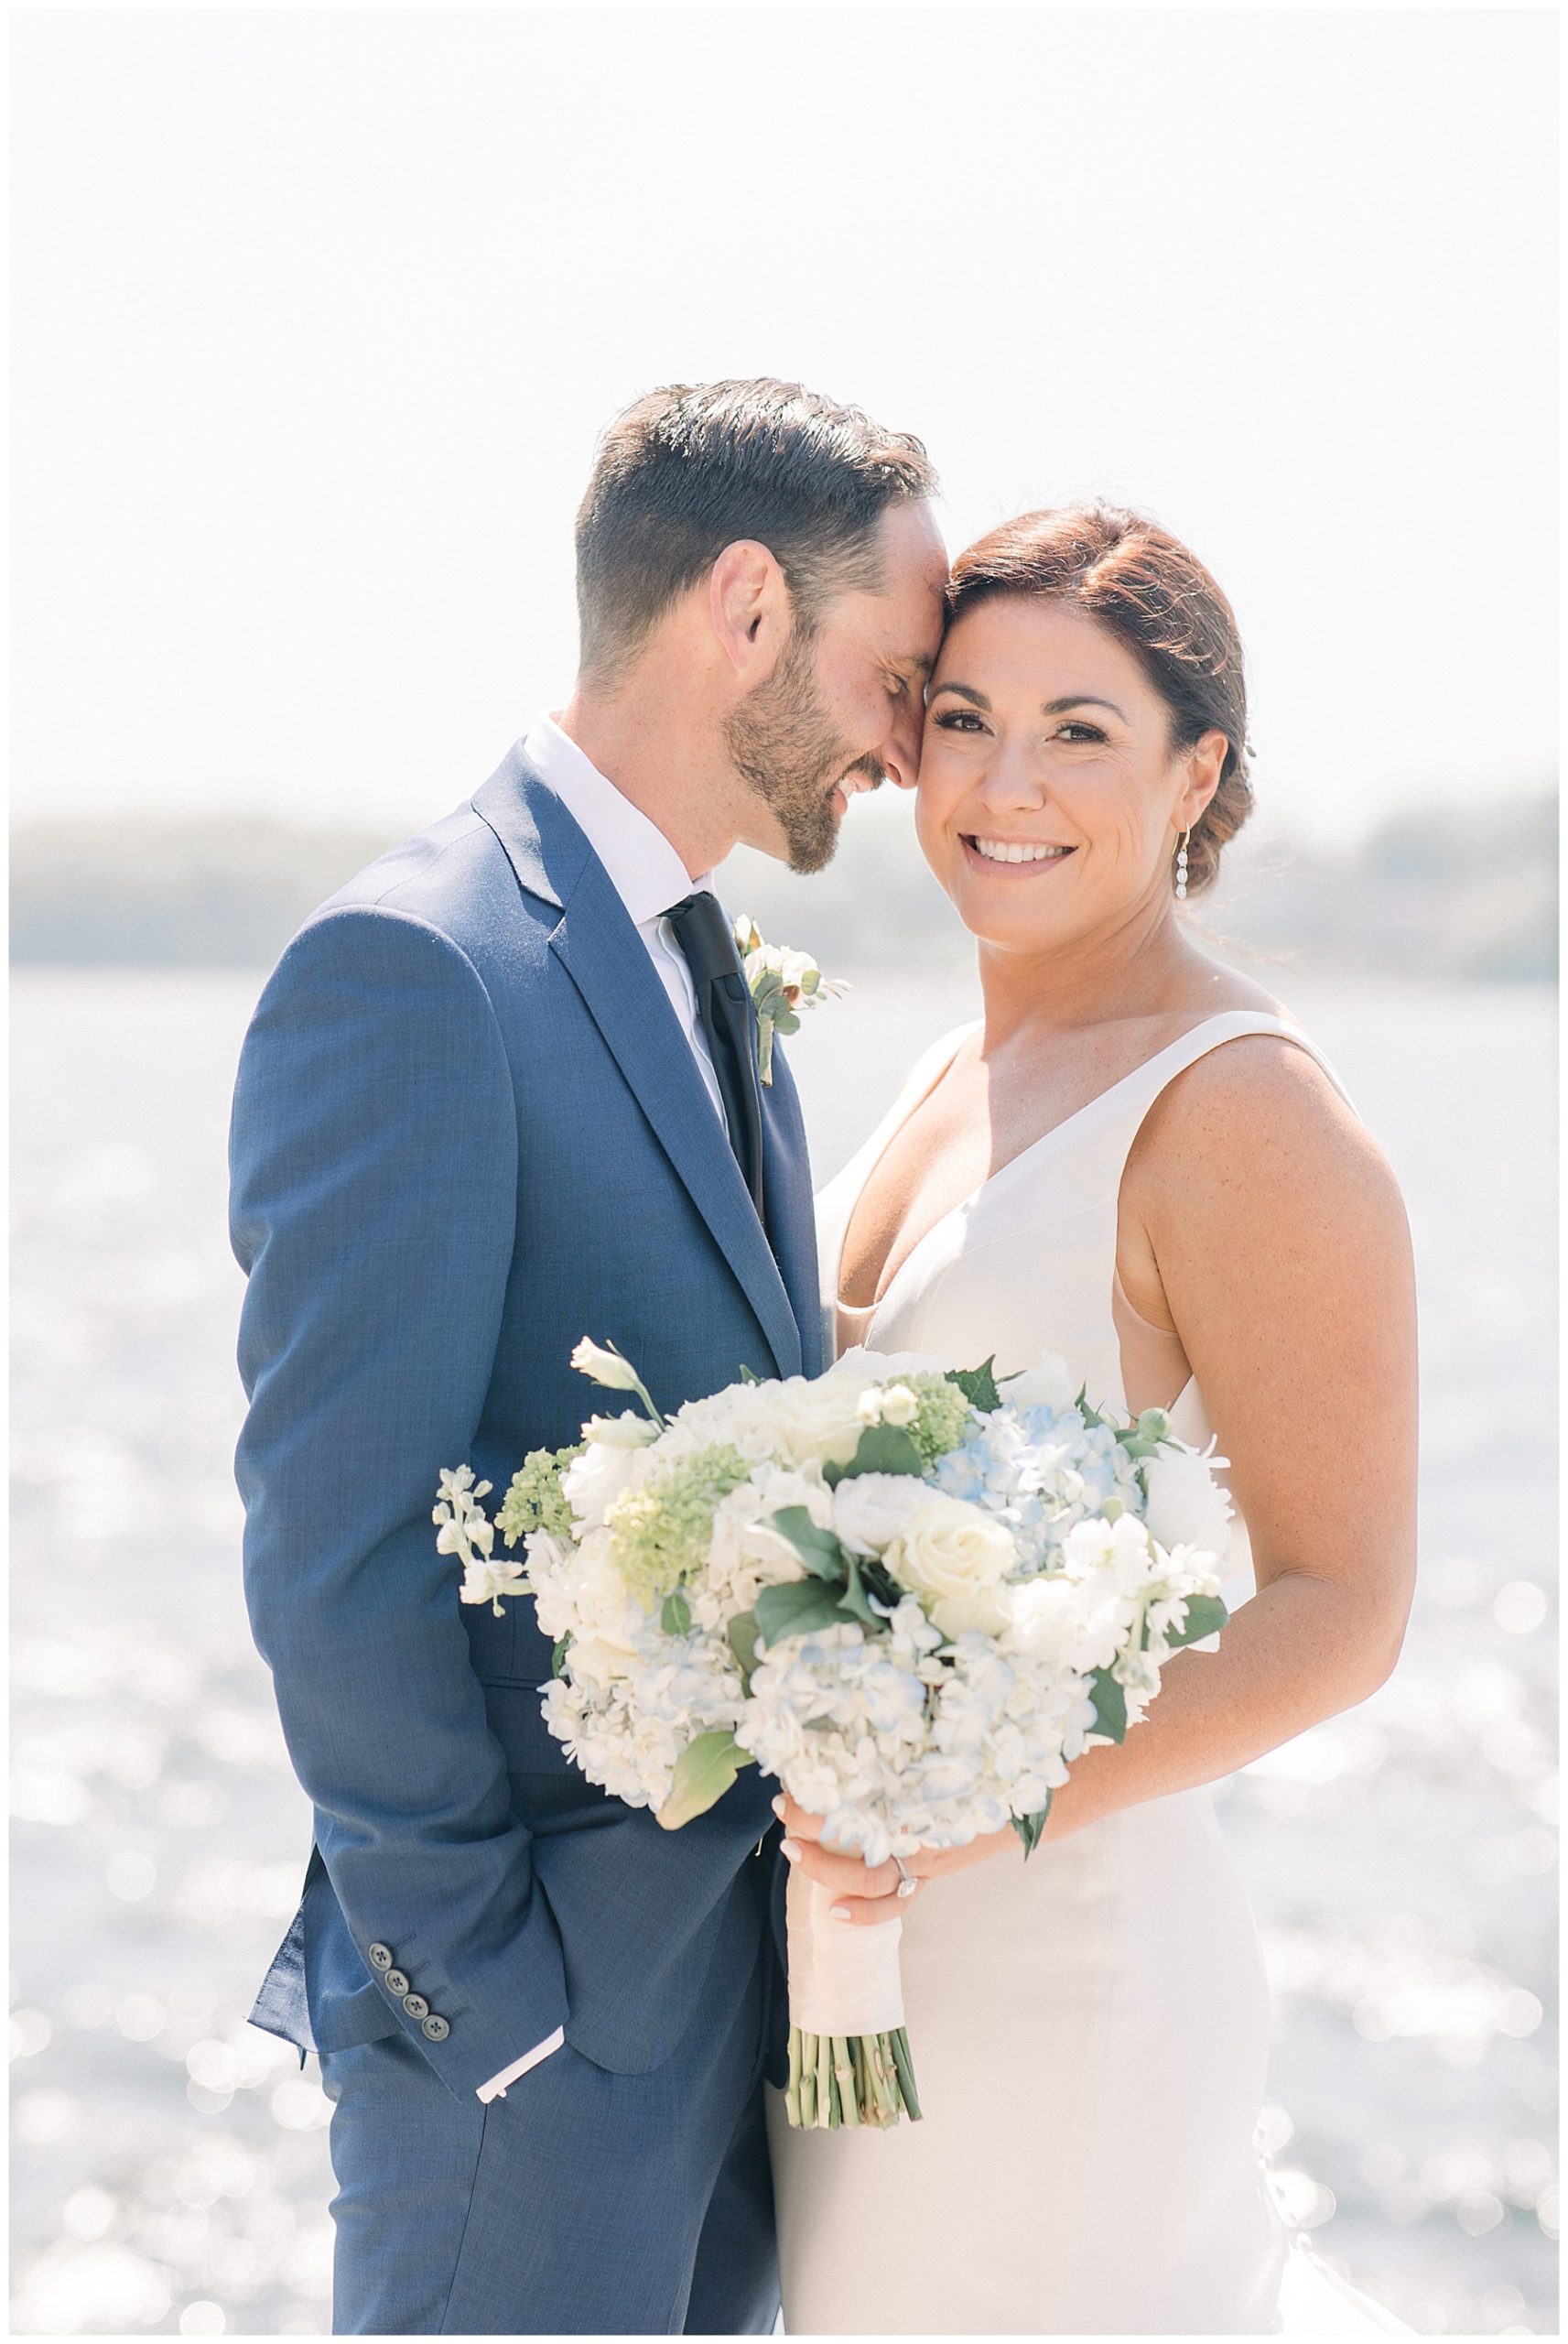 bride + groom steal a few moments together before wedding ceremony in Rhode Island